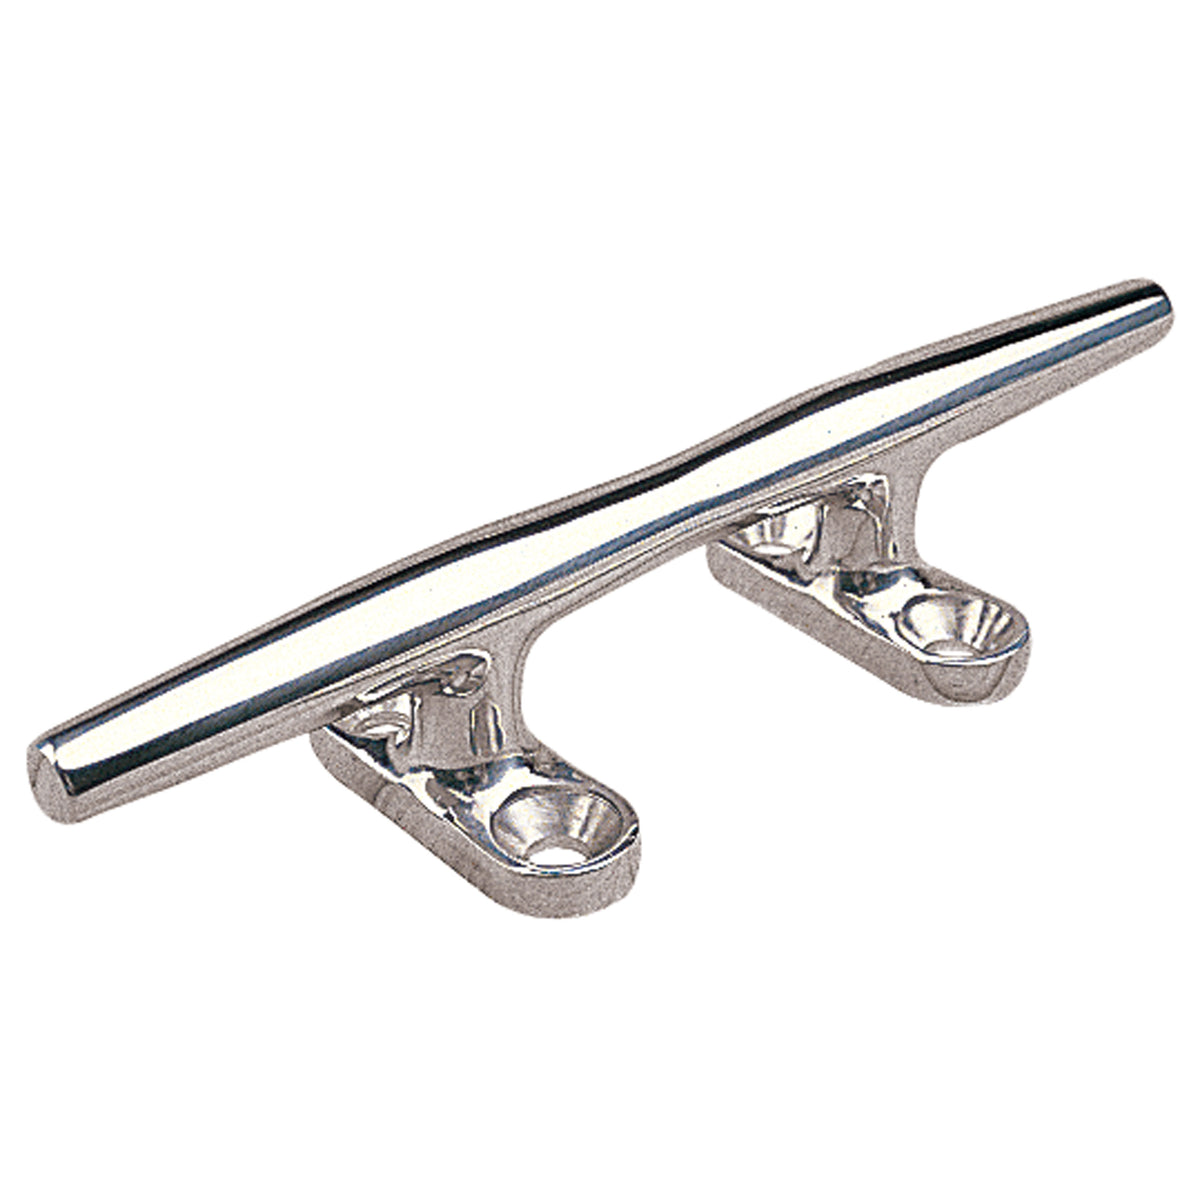 Sea-Dog 041604-1 Stainless Steel Open Base Cleat - 4"